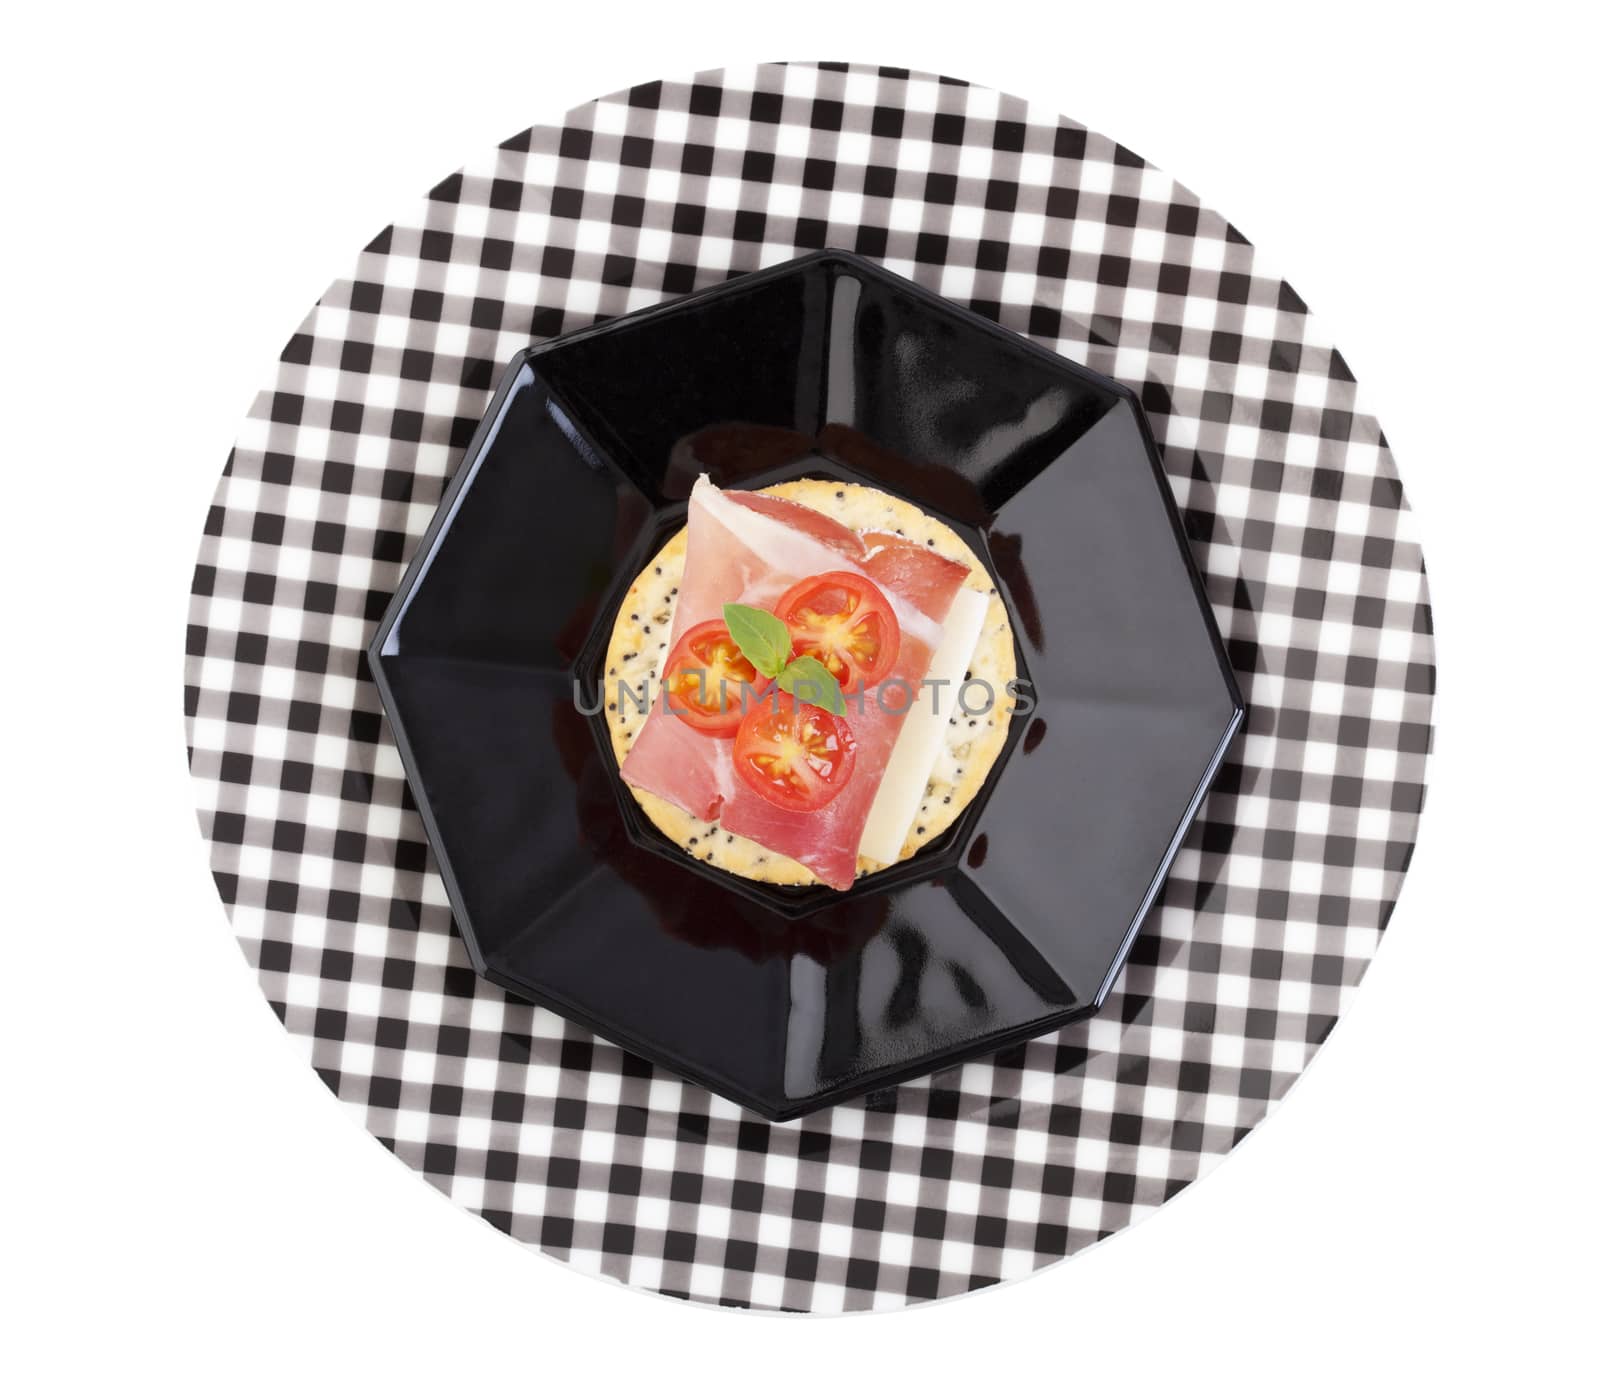 Fresh Proscuitto and Provolone cheese with baby tomato on a poppy and sesame seed cracker; garnished with a sprig of fresh basil.  Isolated with clipping path.